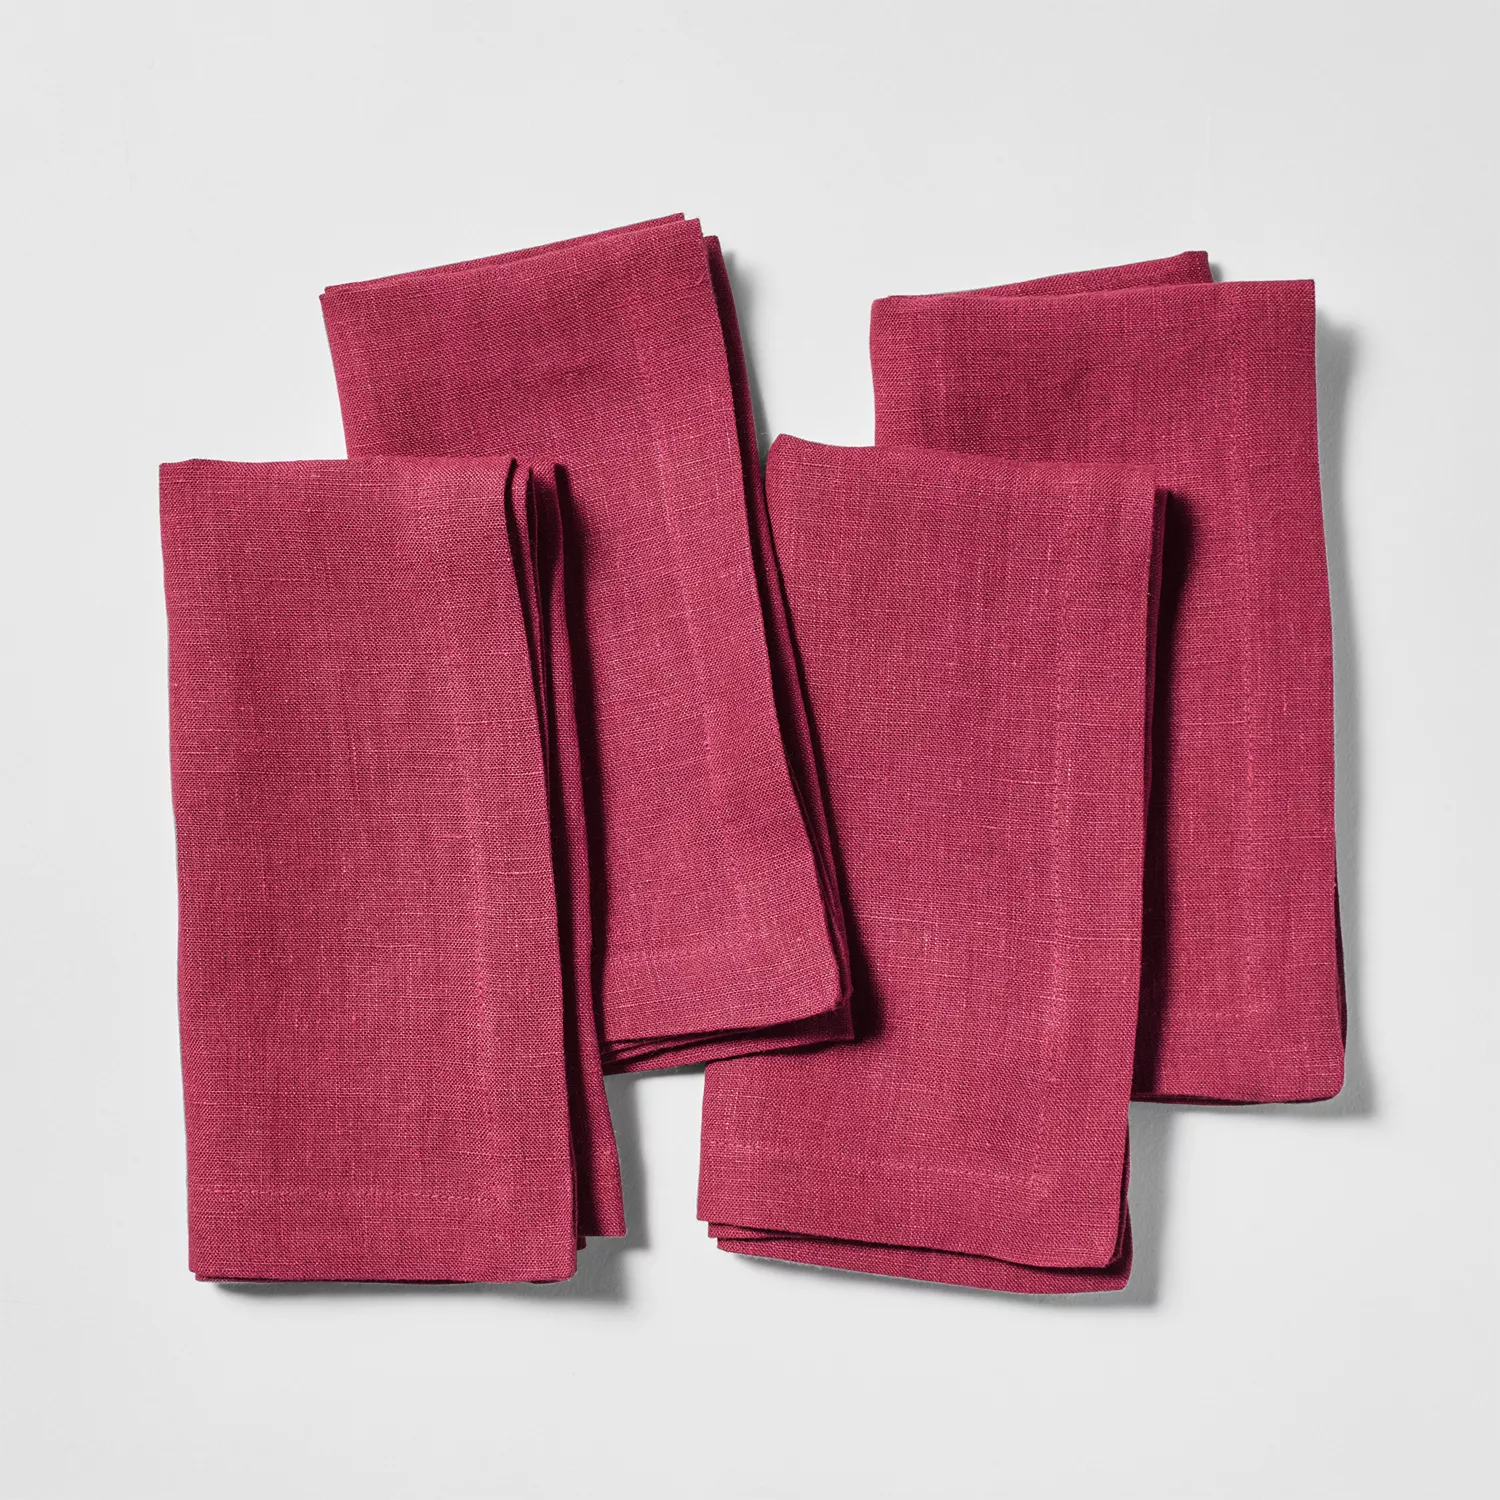 Savvy Serpents - Set of 4 Linen Napkins in 6 Color-Ways – Tulusa